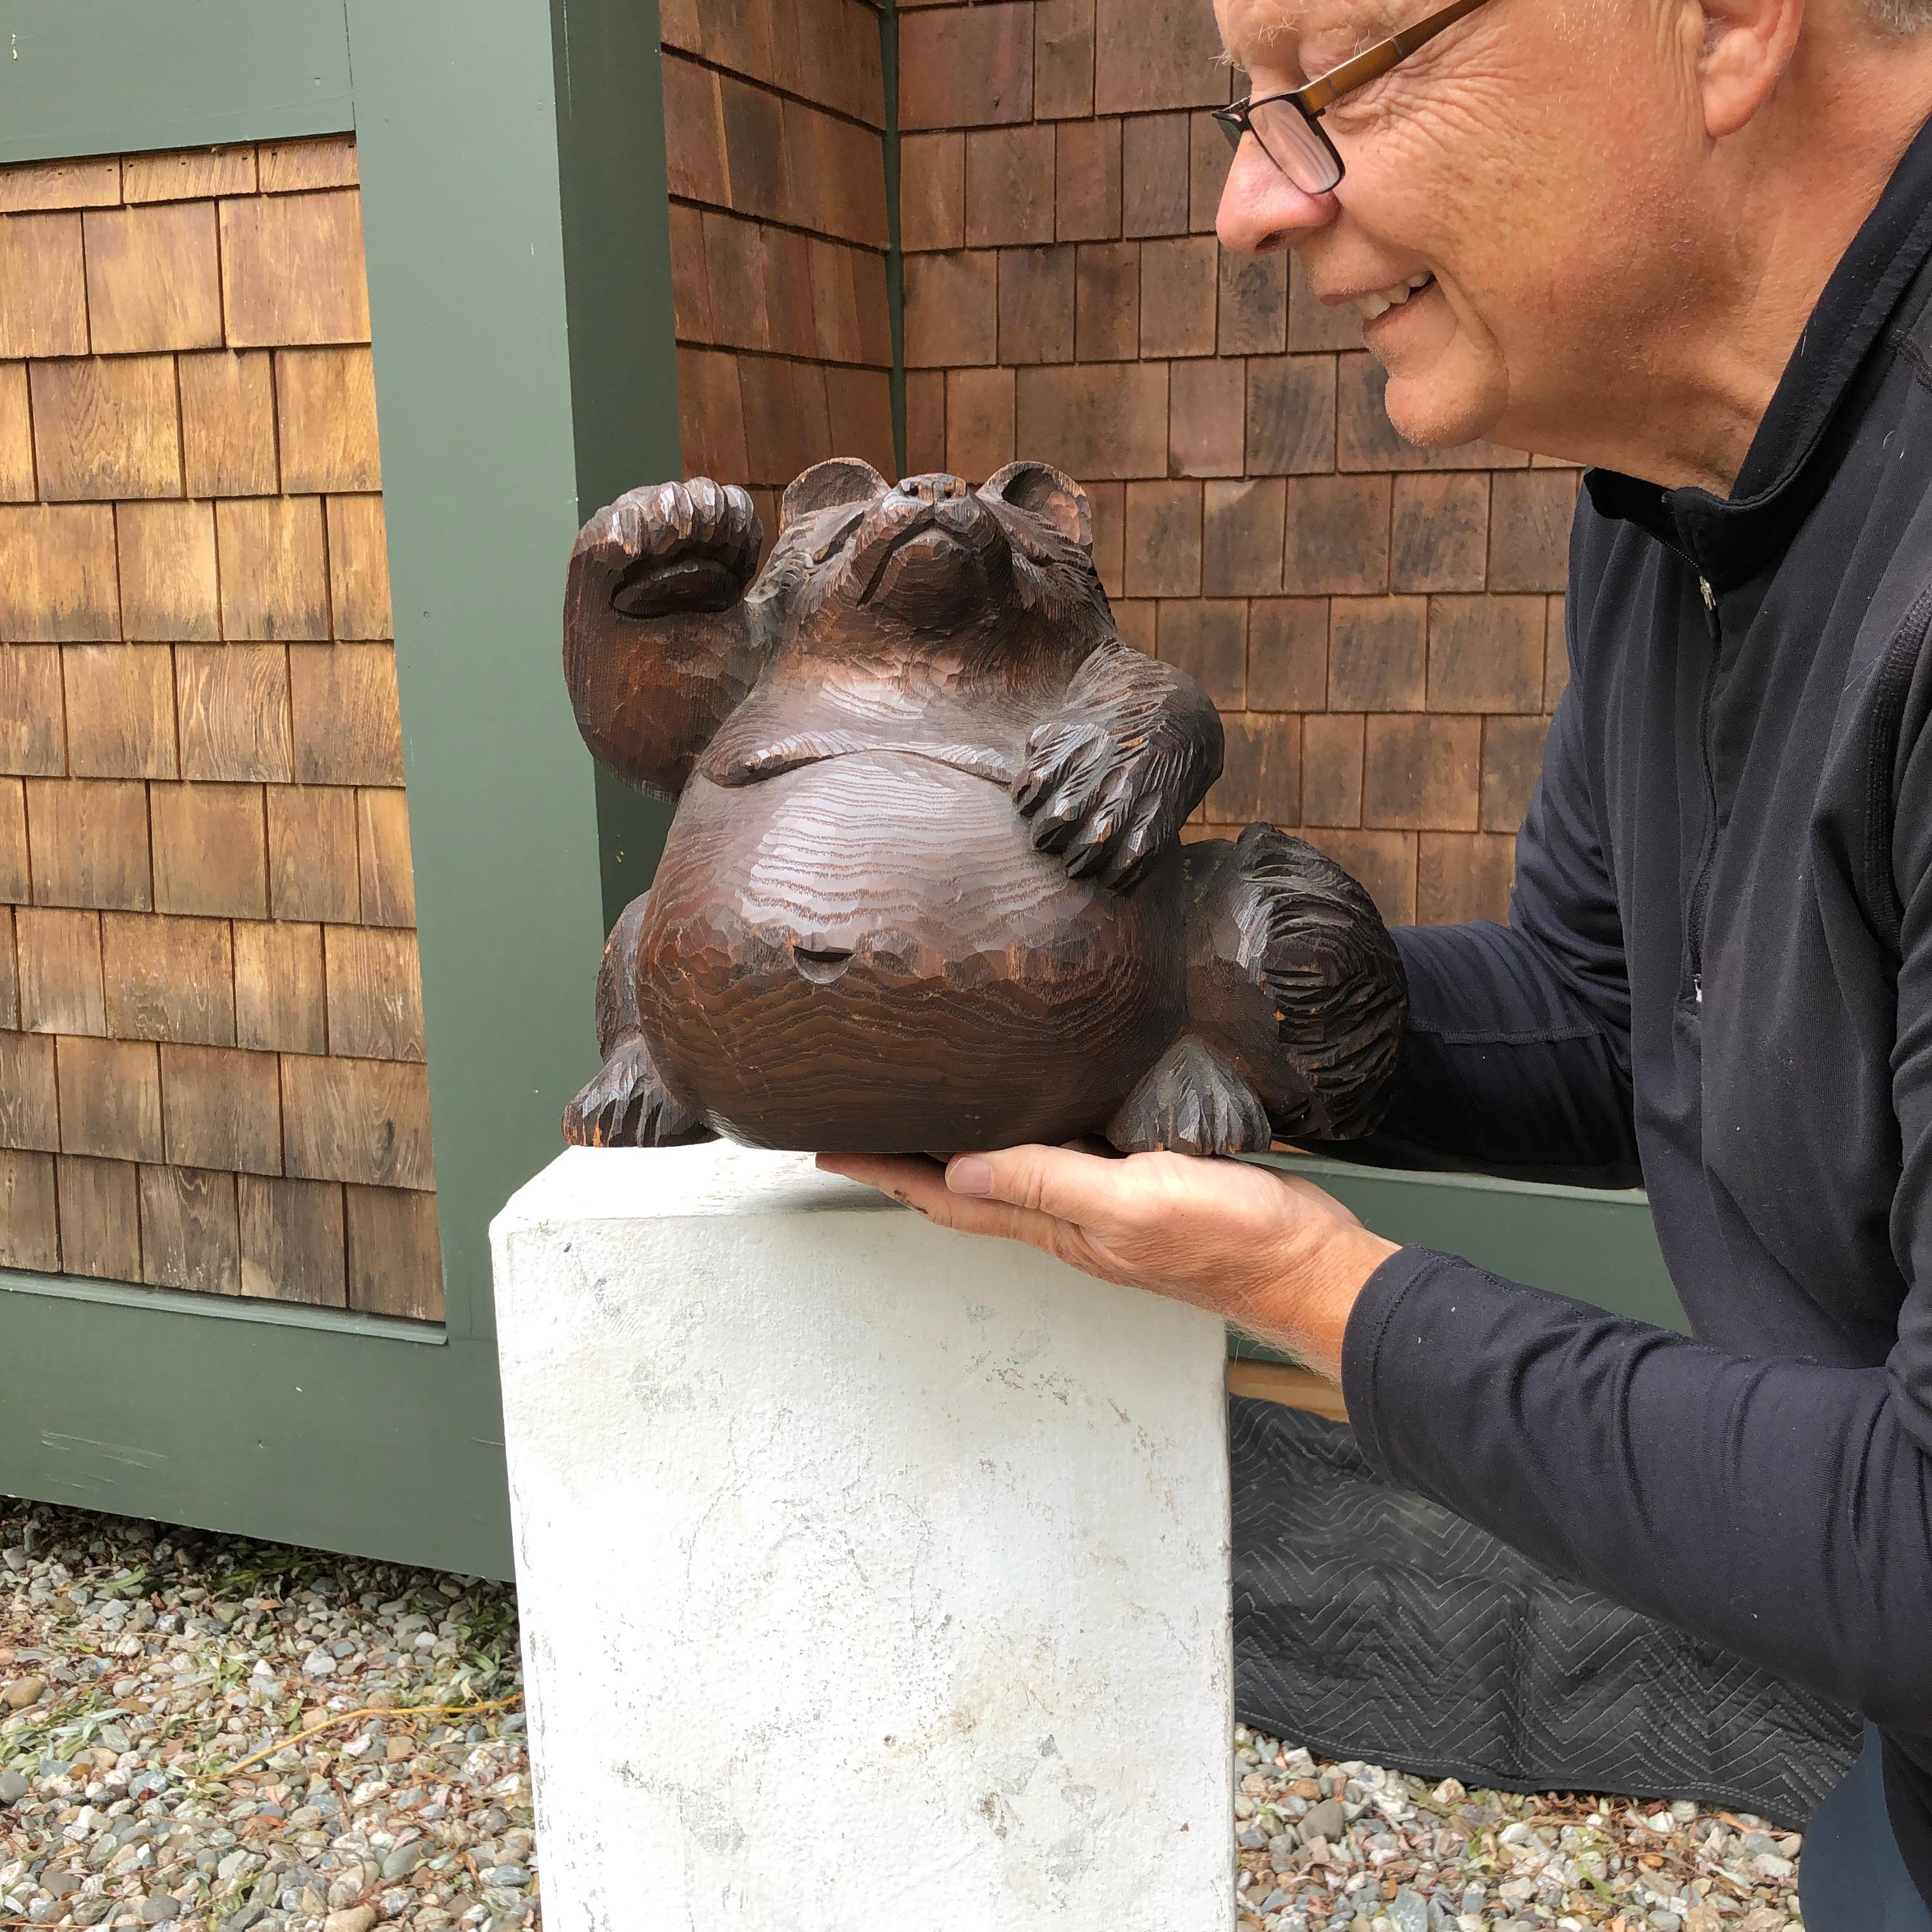 From our most recent acquisitions trip to Kyoto and Southern Japan

An antique hand carved solid wood tanuki carved by a master artisan and Japanese sculptors of wood. Carved from a single log, this little gem exudes charm and specialness, after